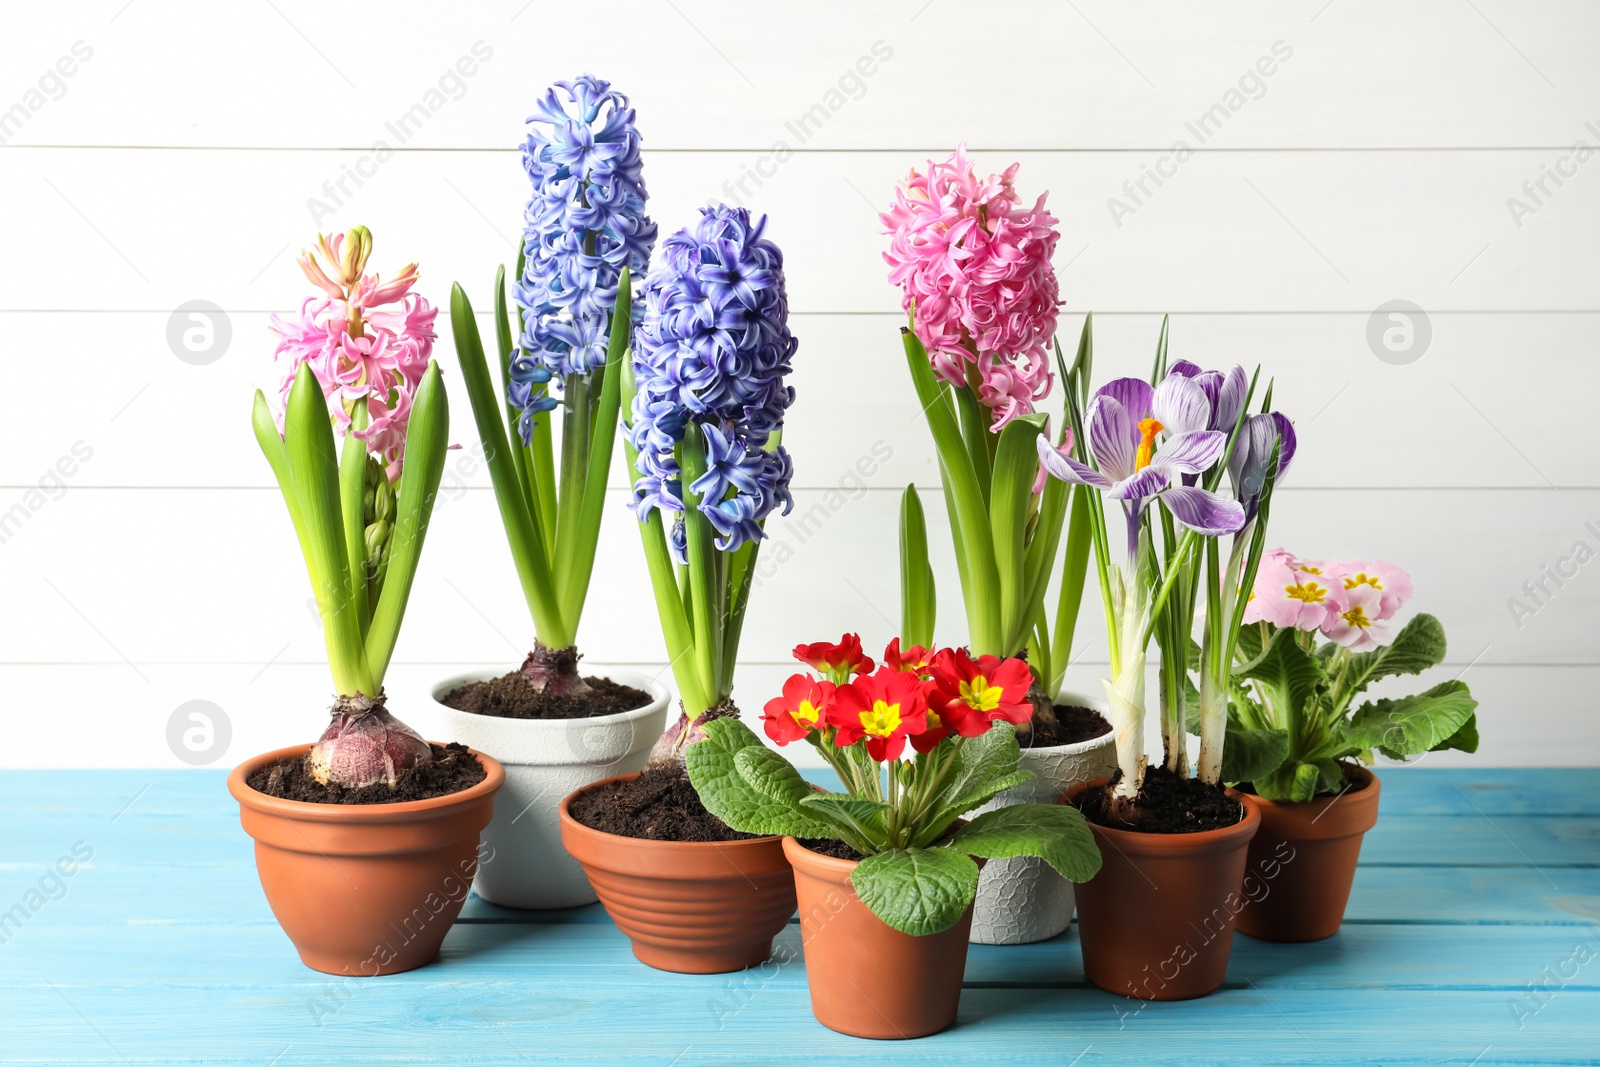 Photo of Different beautiful potted flowers on light blue wooden table